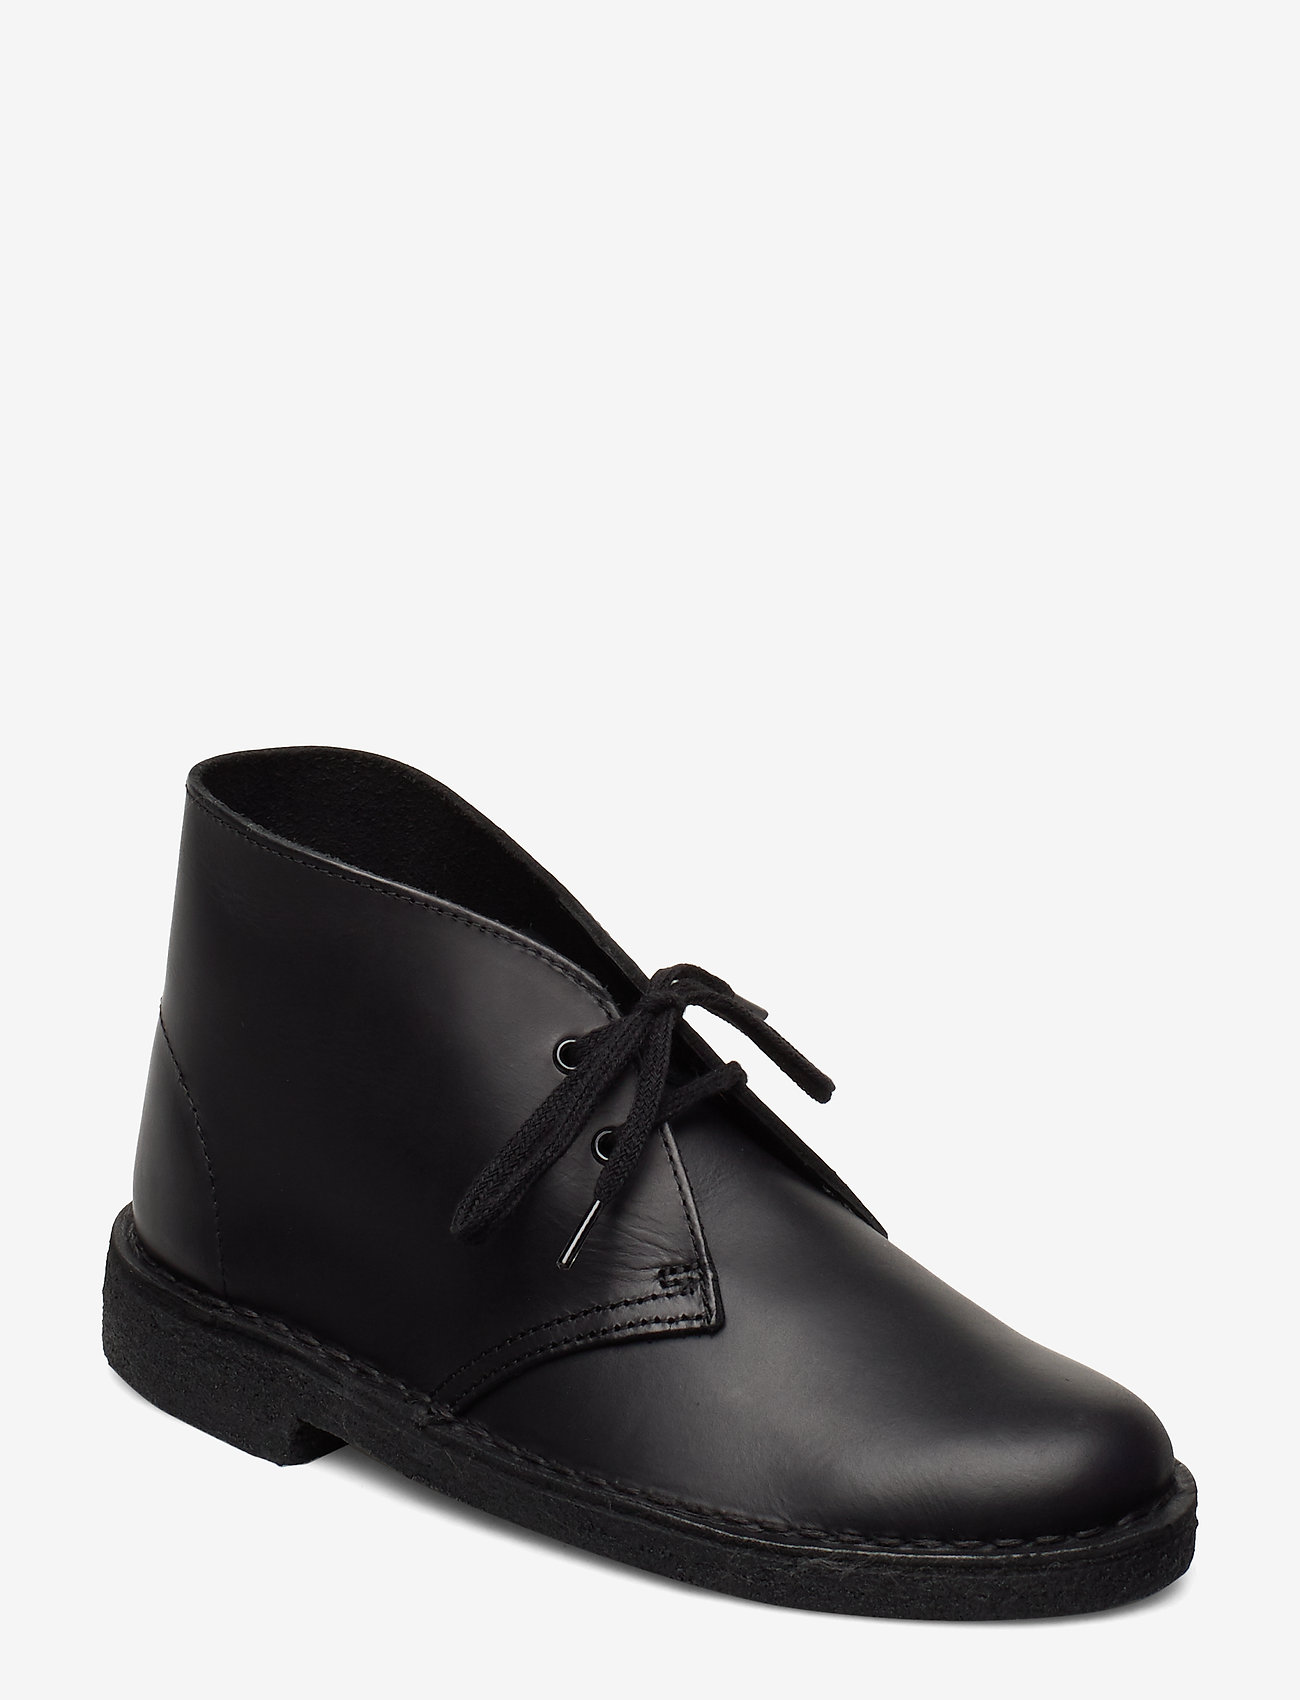 clarks flat ankle boots